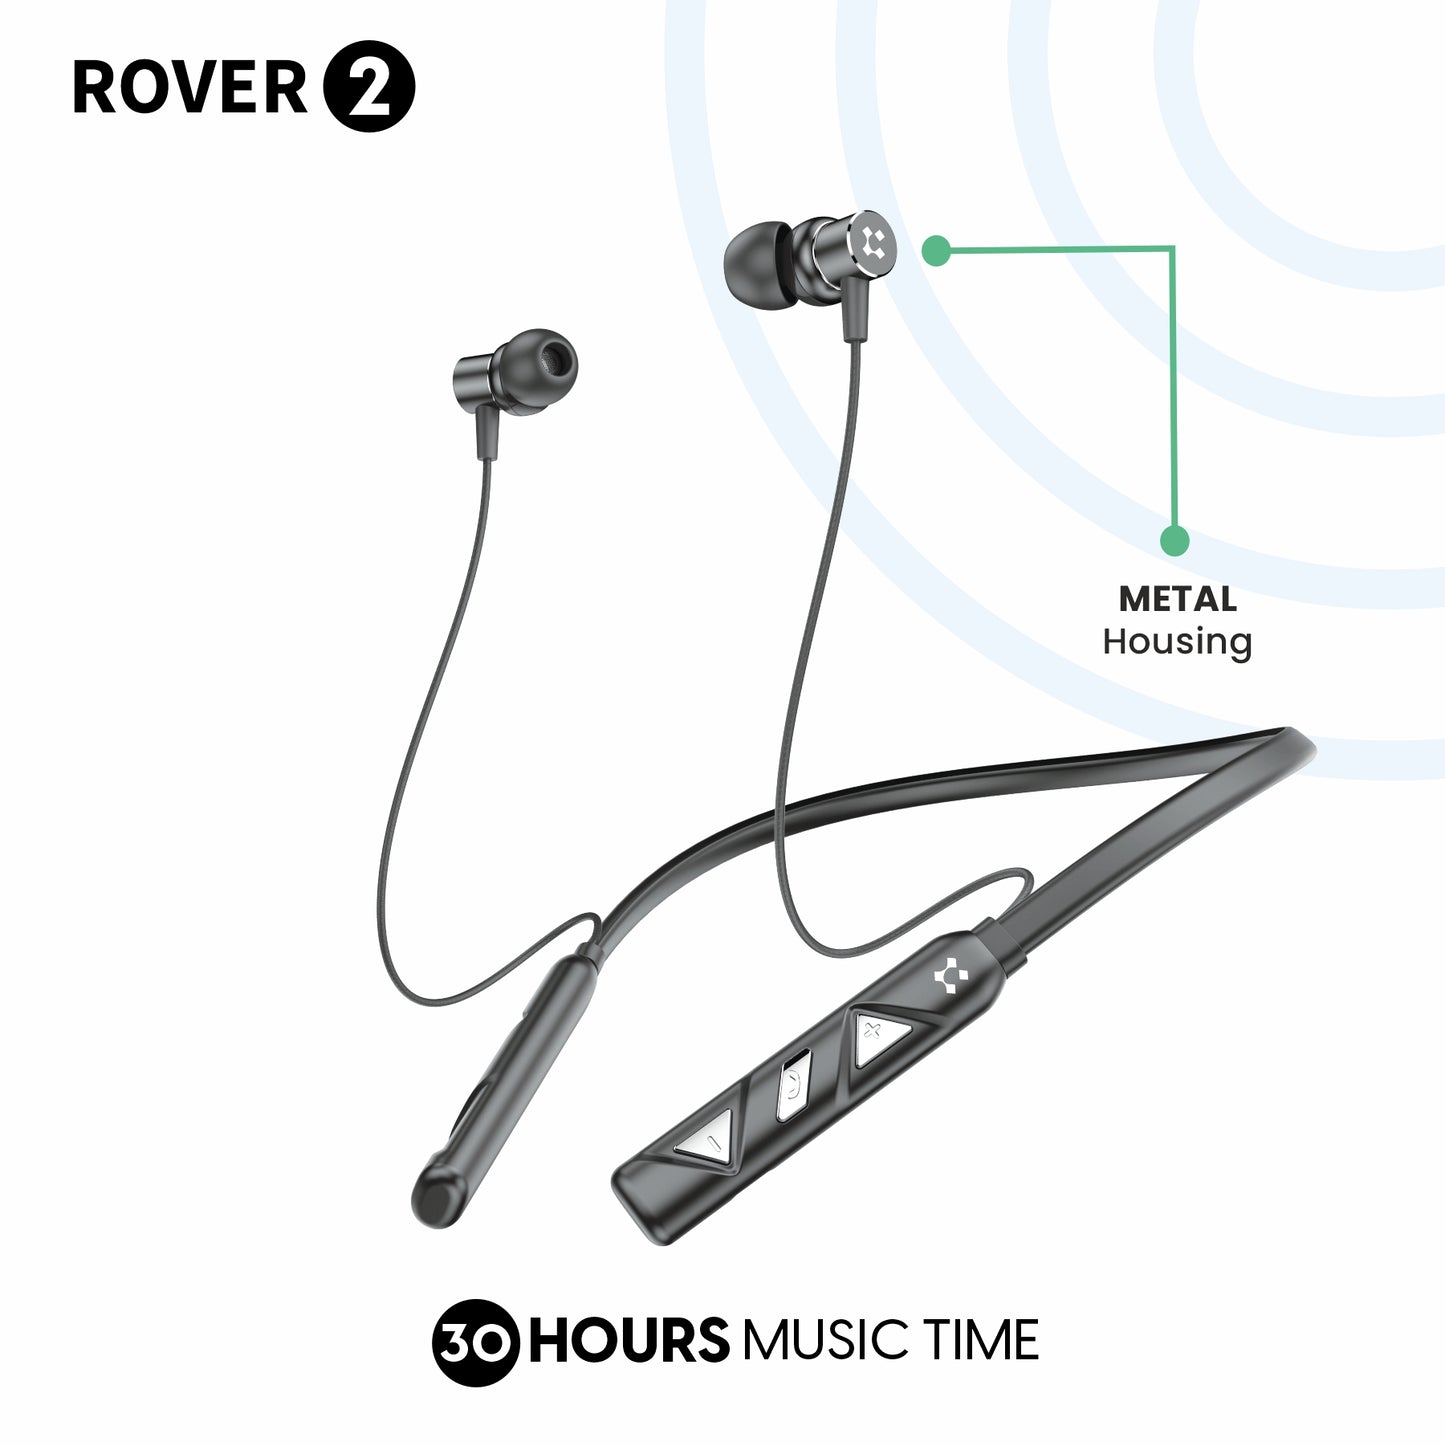 LYNE Rover 2 30 Hours Music Time Bluetooth Neckband with Magnetic Earbuds & Mic